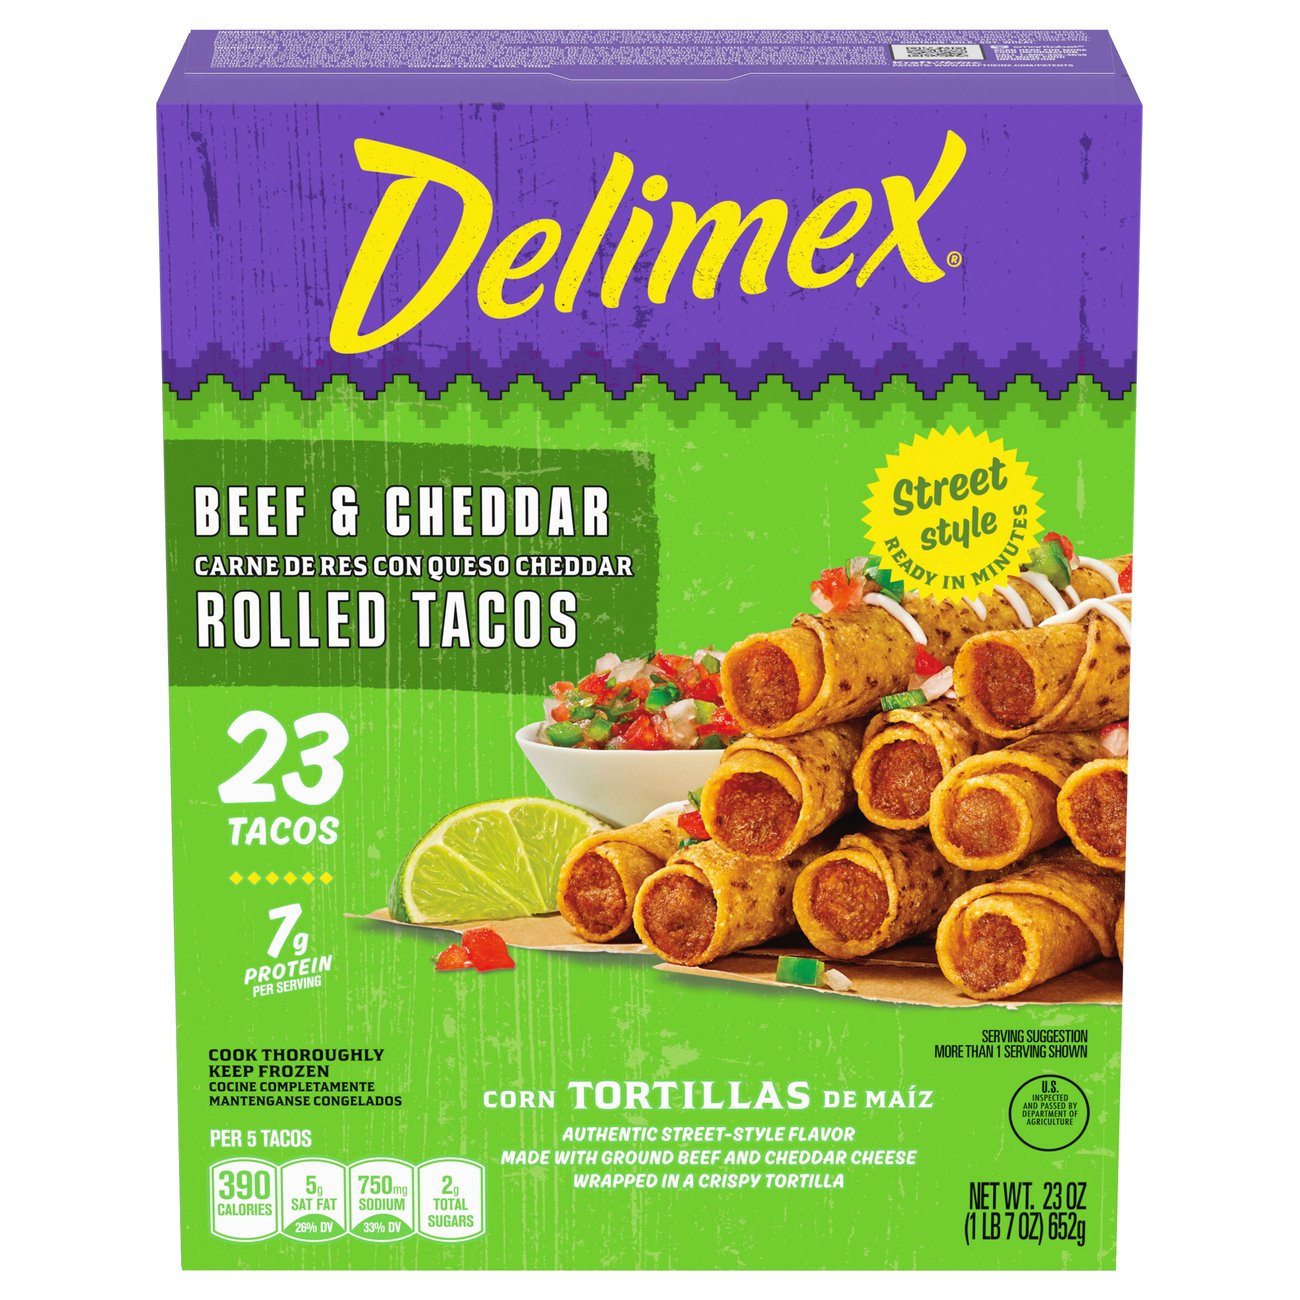 Delimex Beef & Cheddar Rolled Tacos - Shop Entrees & Sides at H-E-B